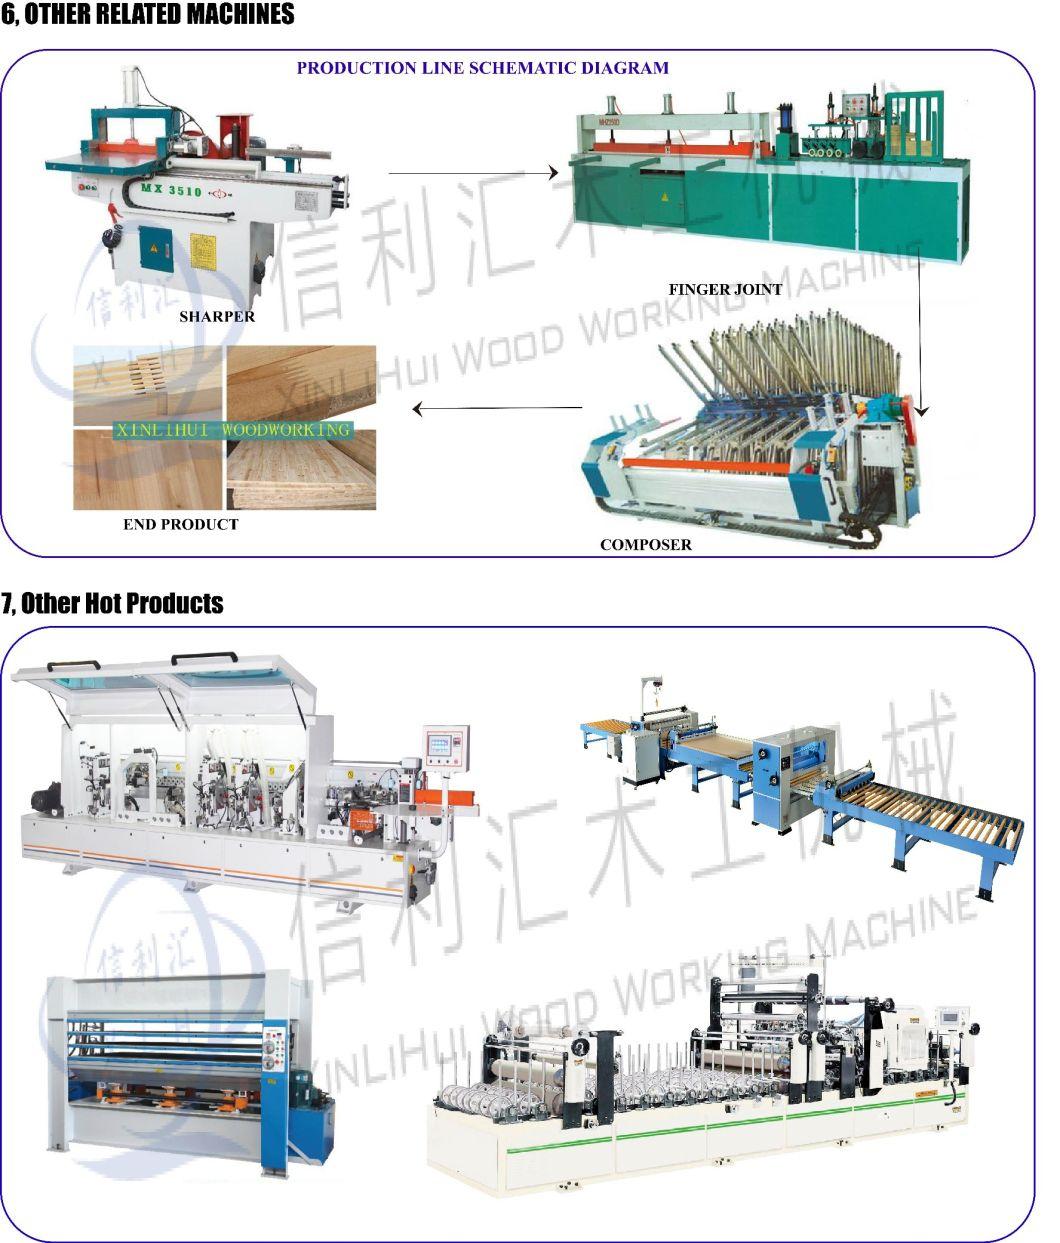 Automatic Infinite Lengthening Comb Joint Machine Mxb3518 with Maximum Wood Width 590mm and Maximum Wood Thickness 150mm